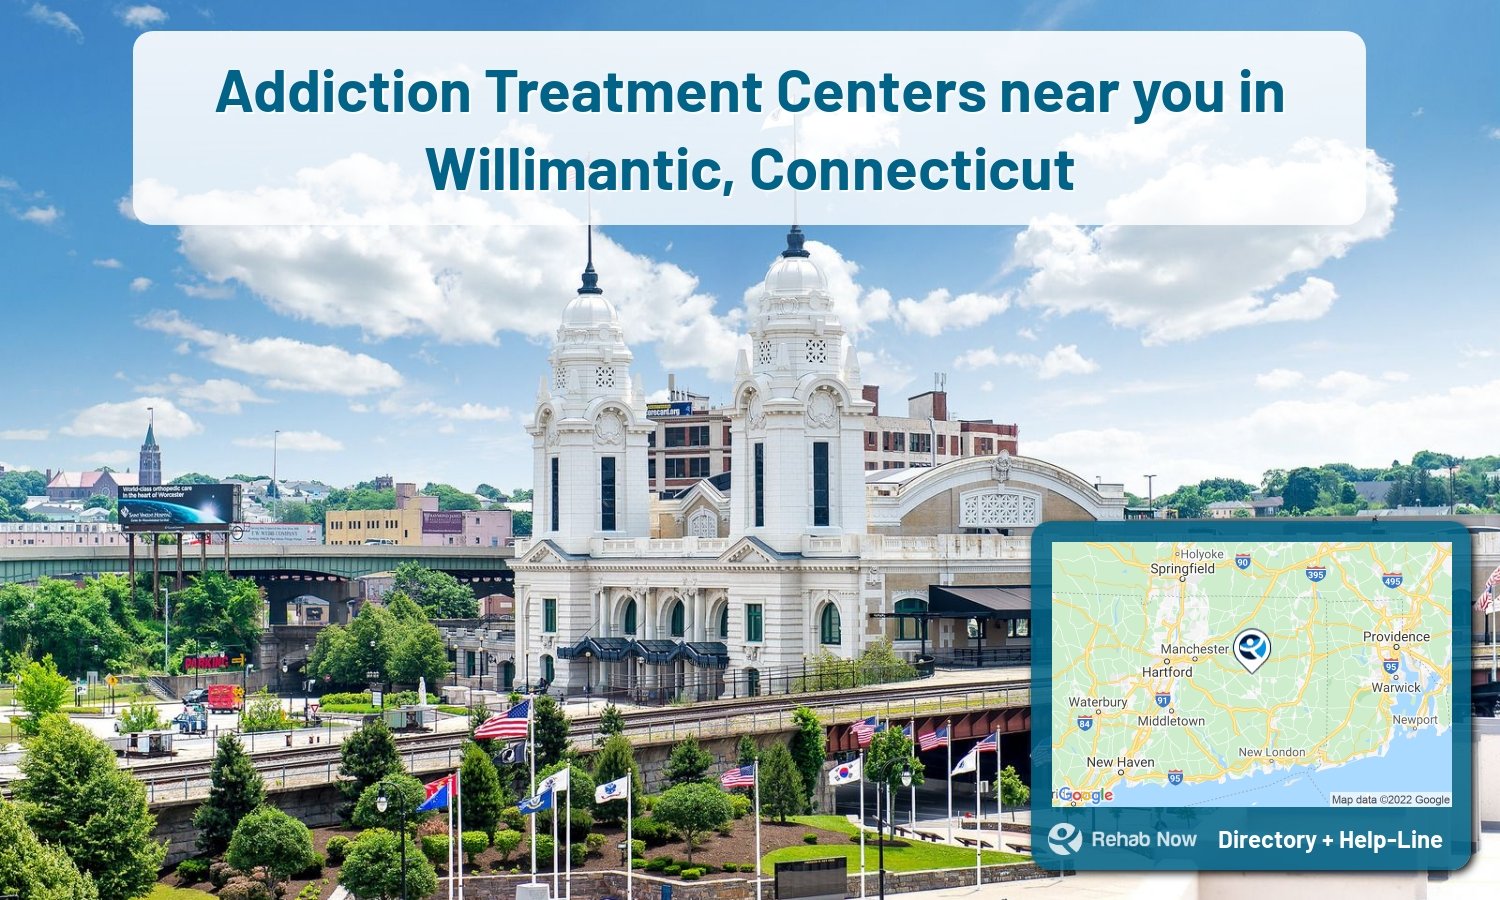 Willimantic, CT Treatment Centers. Find drug rehab in Willimantic, Connecticut, or detox and treatment programs. Get the right help now!